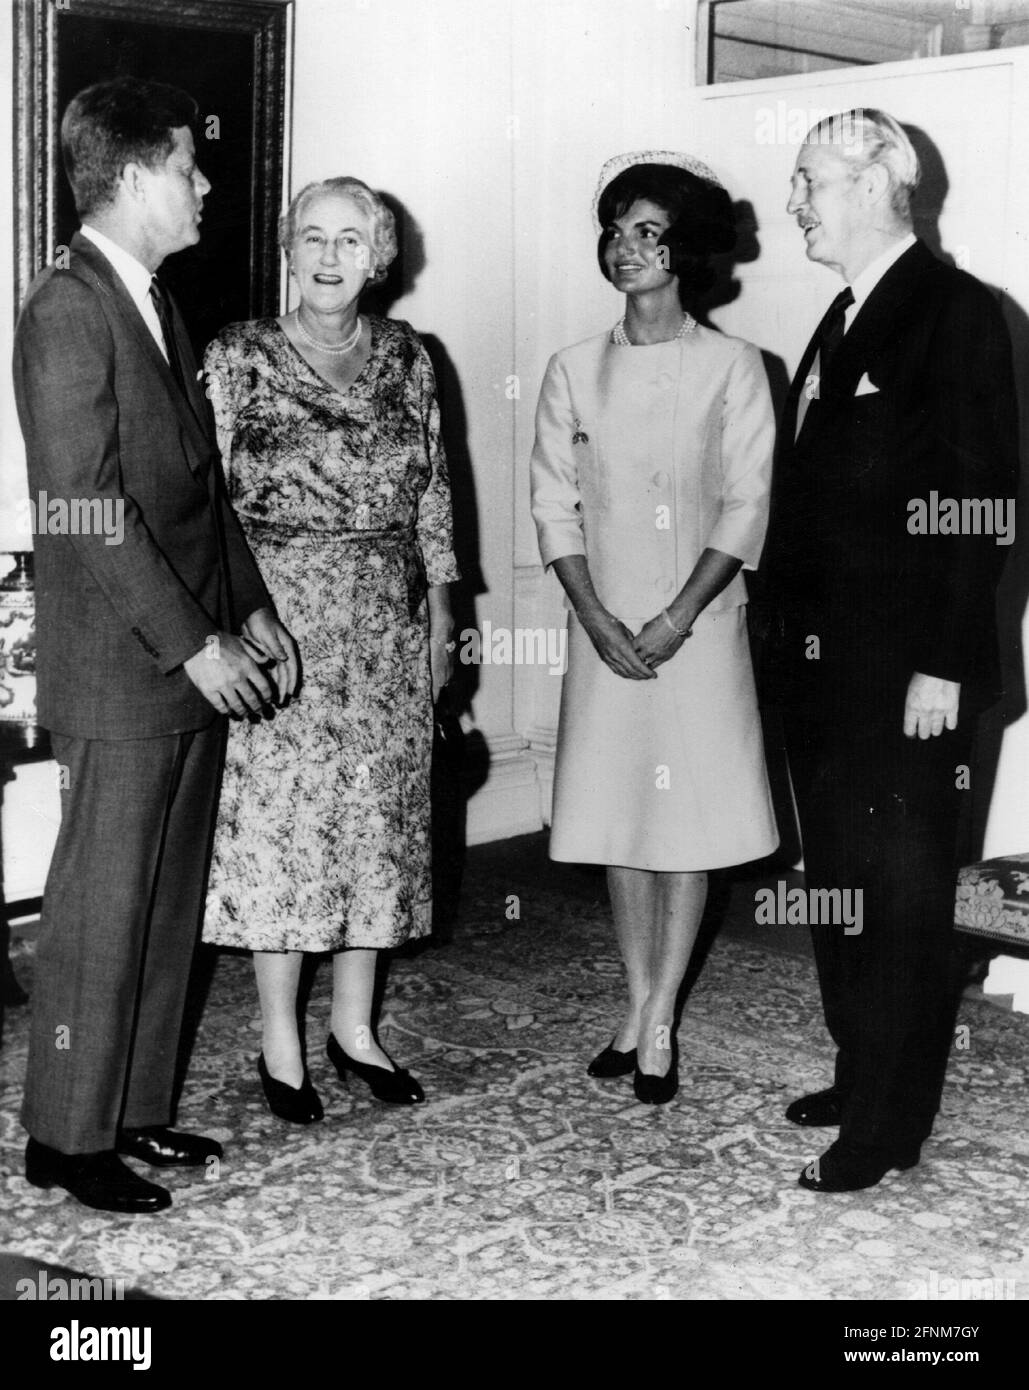 Kennedy, Jacqueline, 28.7.1929 - 19.5.1994, First Lady of America (20.1.1961 - 22.11.1963), ADDITIONAL-RIGHTS-CLEARANCE-INFO-NOT-AVAILABLE Stockfoto